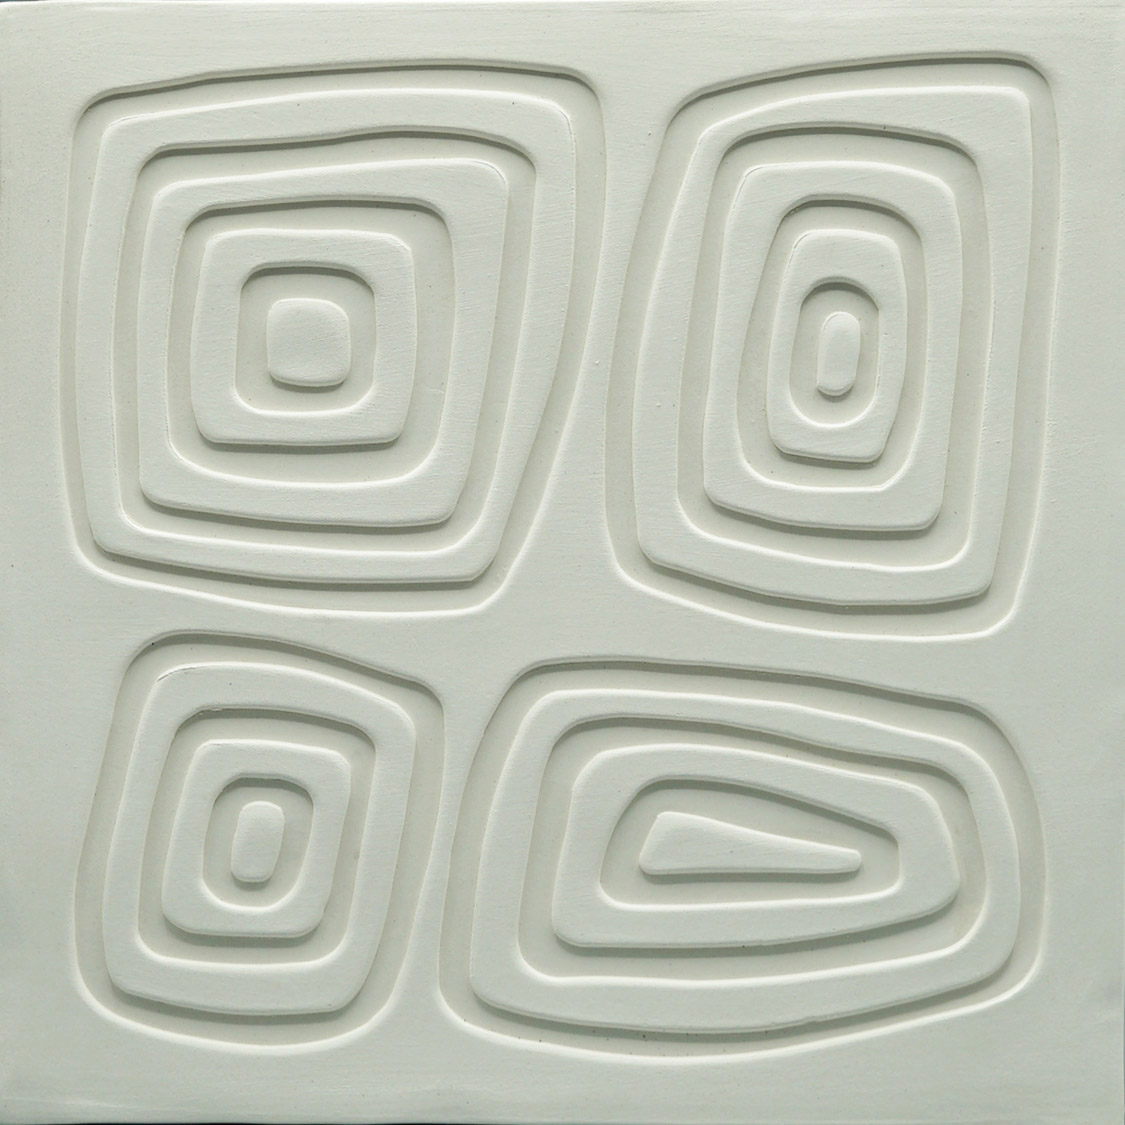 Thumbnail of four rectangular shapes with soft edges for condo.